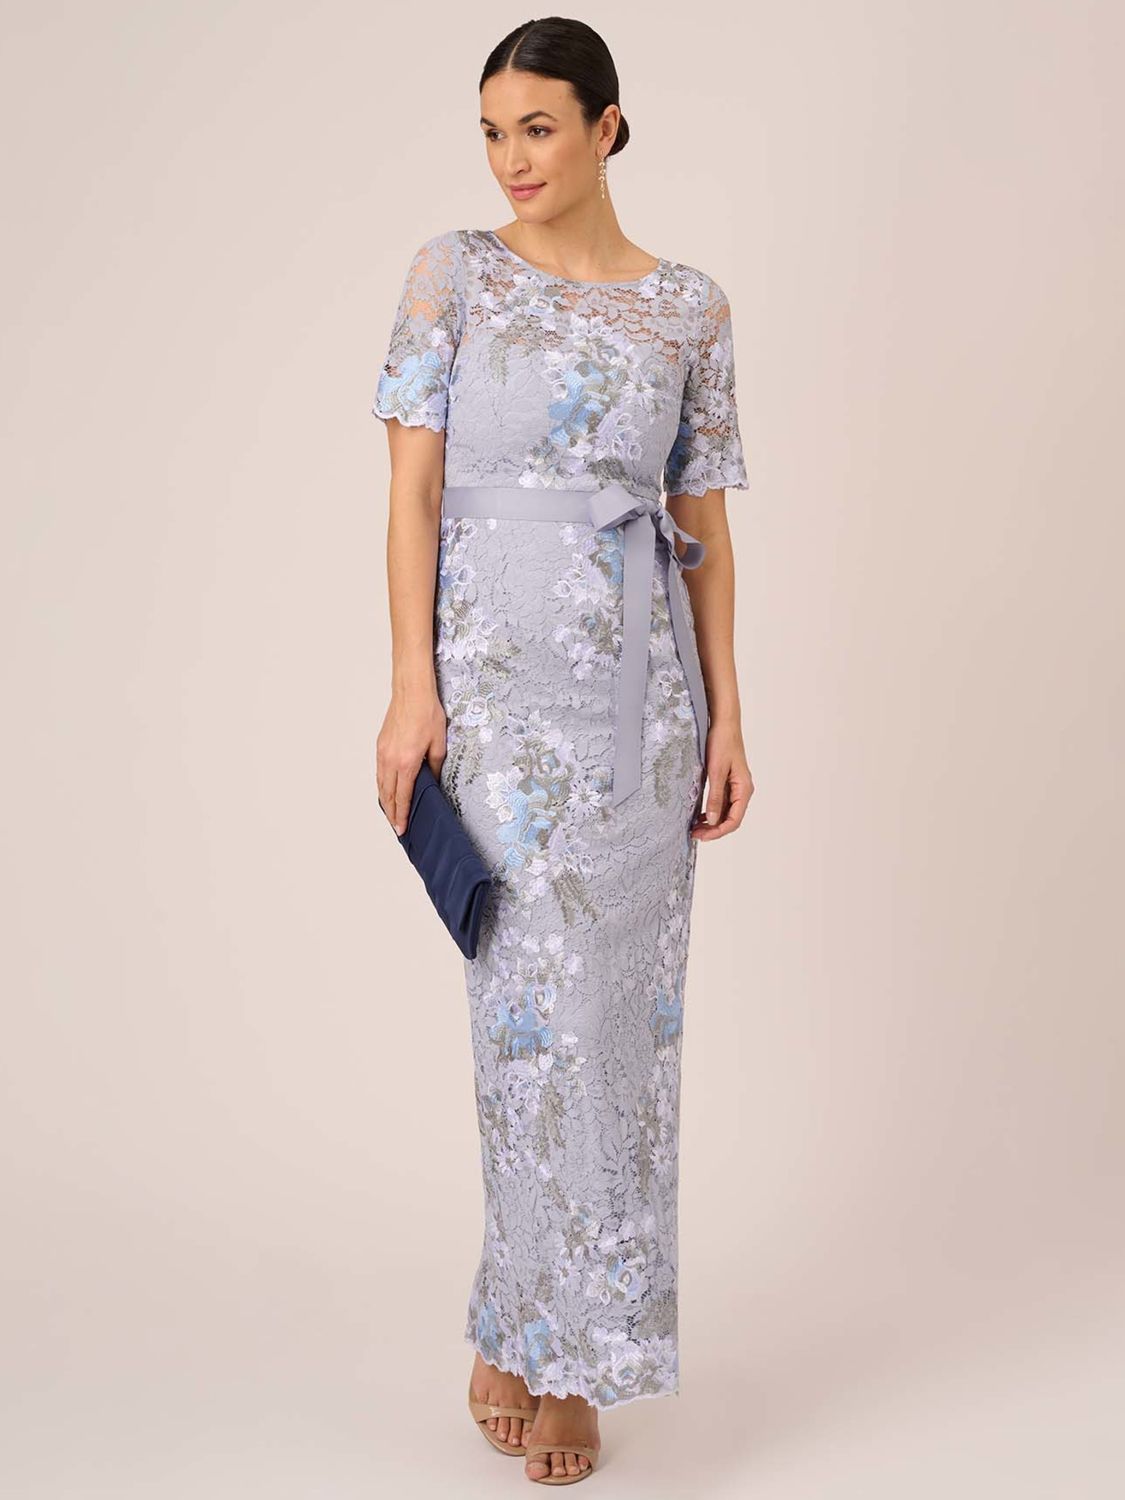 Adrianna Papell Floral Embroidered Lace Gown, Blue Breeze at John Lewis ...